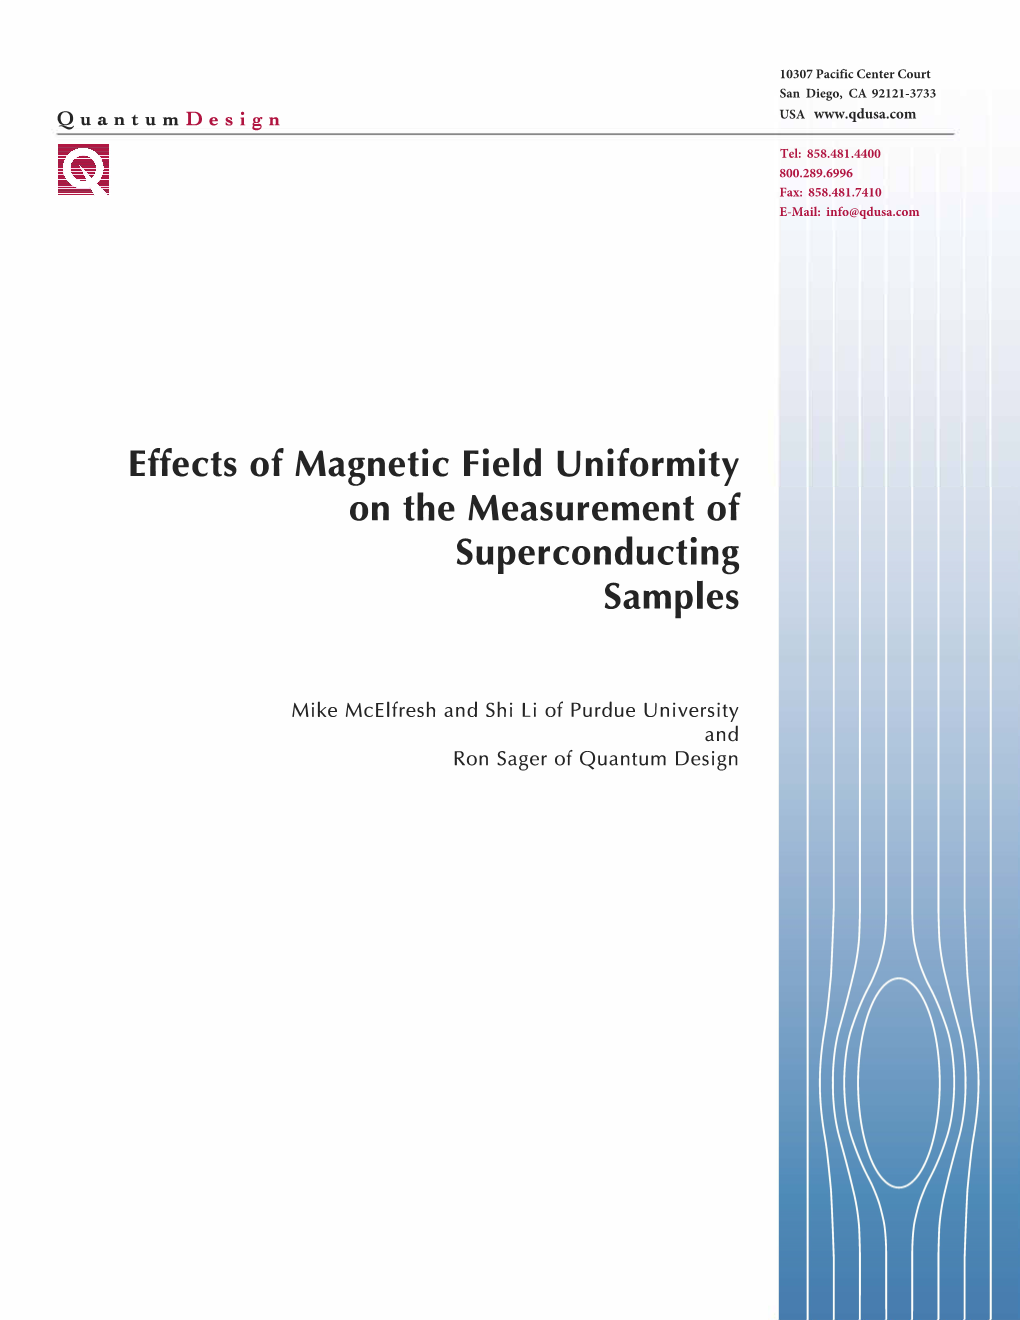 Effects of Magnetic Field Uniformity on the Measurement of Superconducting Samples